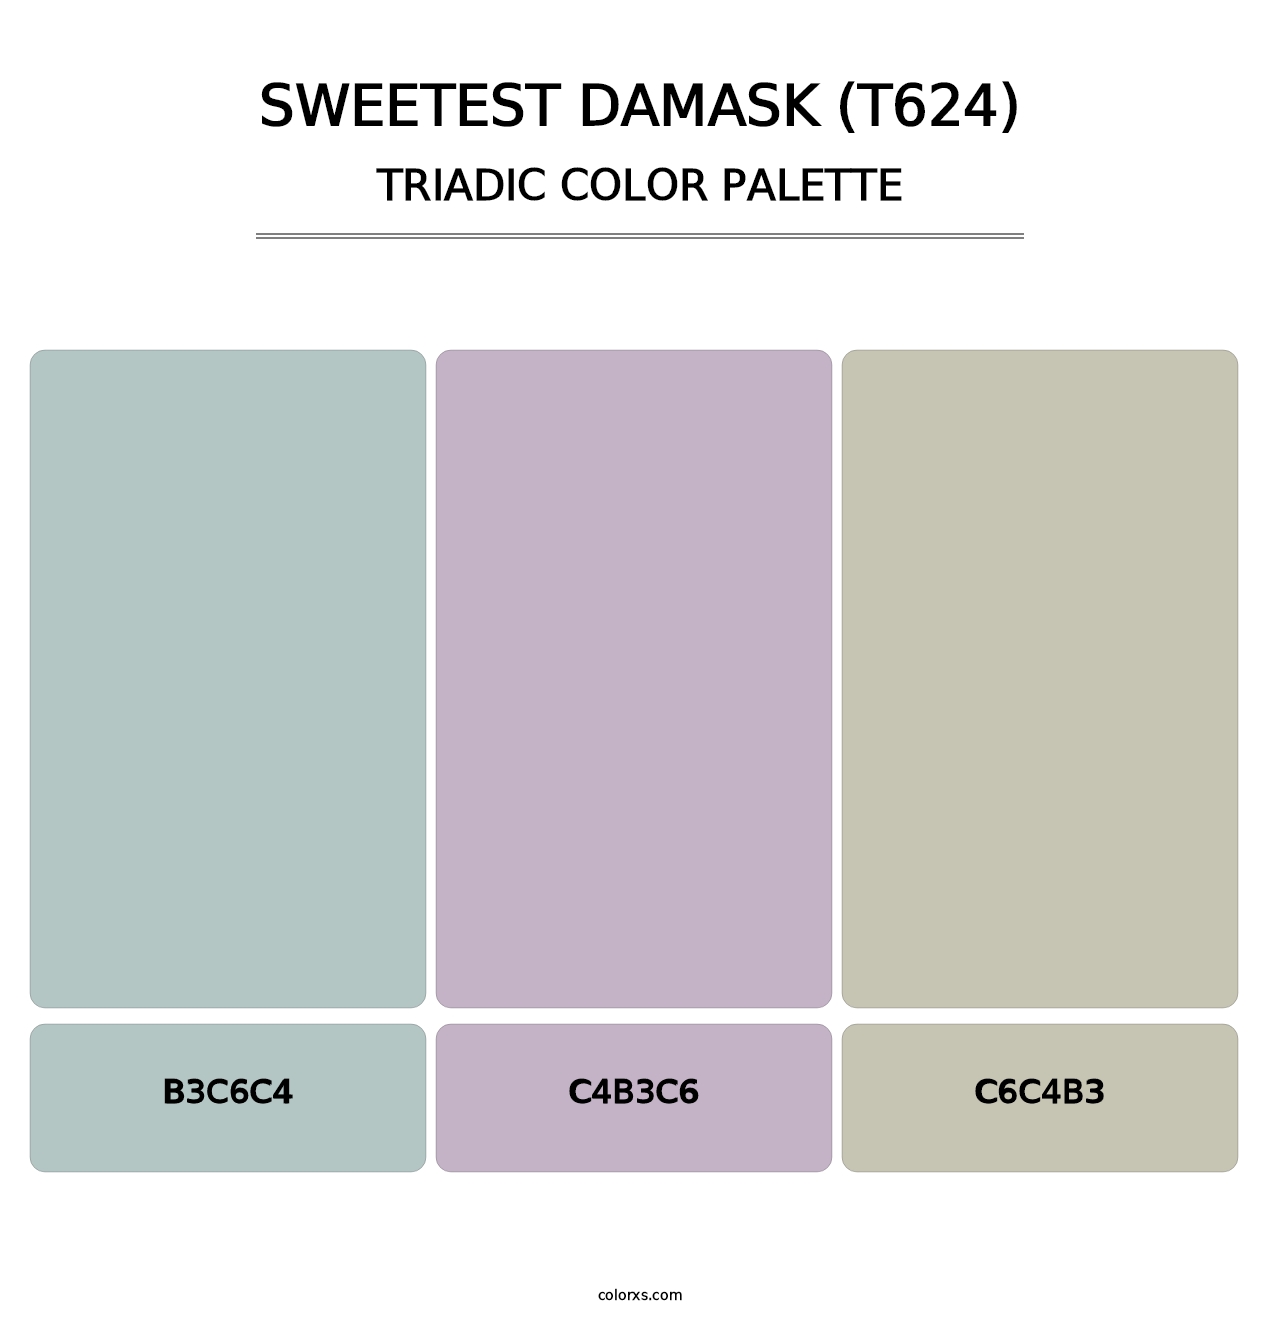 Sweetest Damask (T624) - Triadic Color Palette